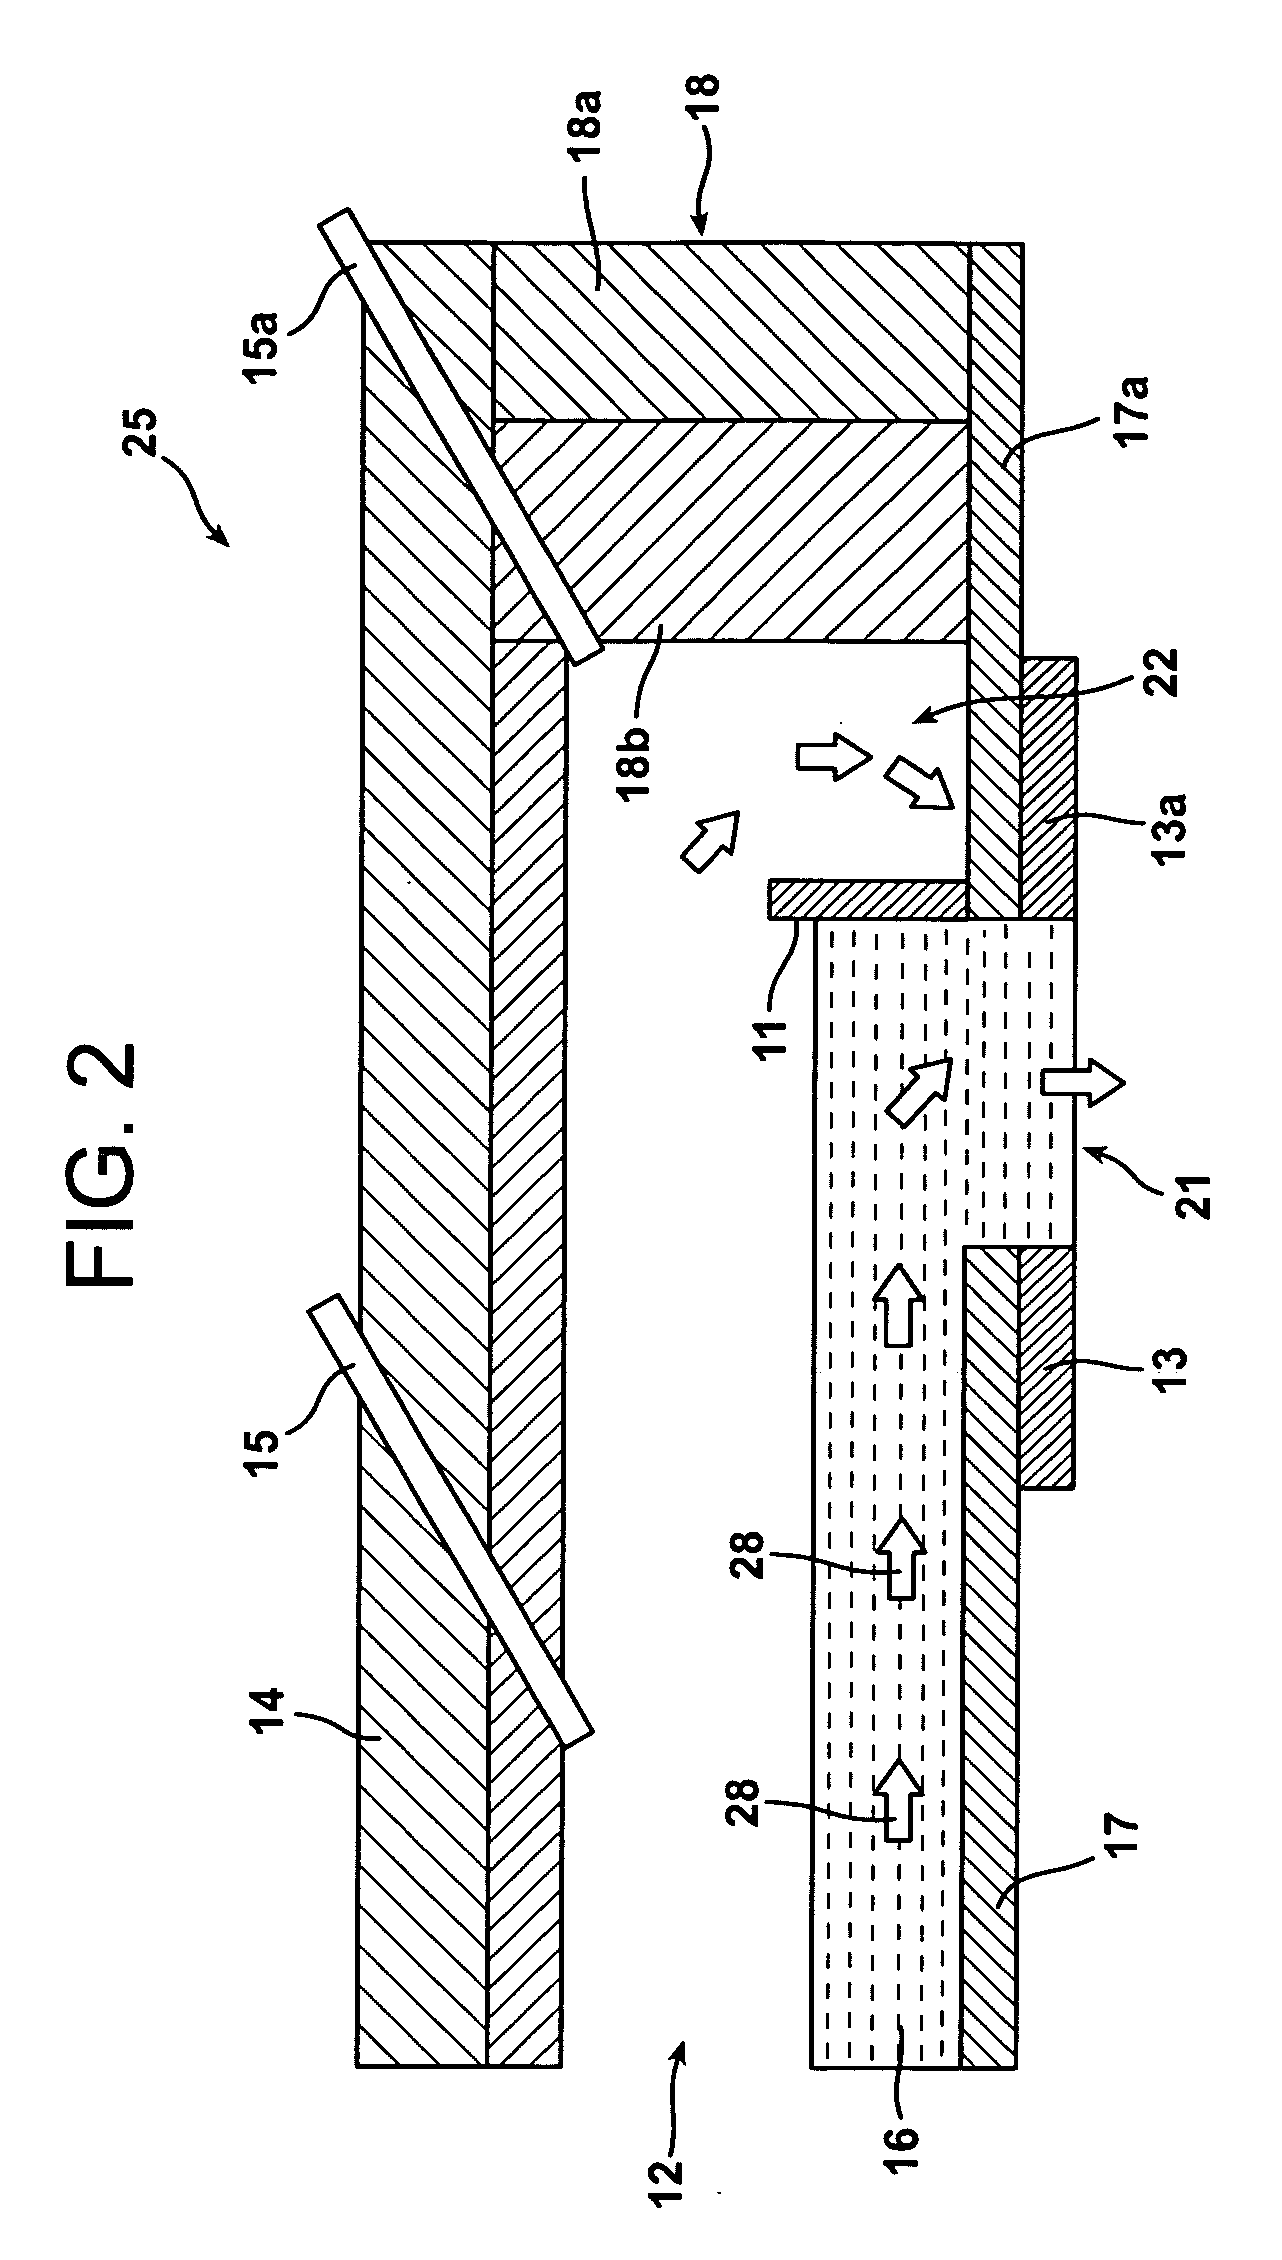 Apparatuses and methods for controlling the temperature of glass forming materials in forehearths